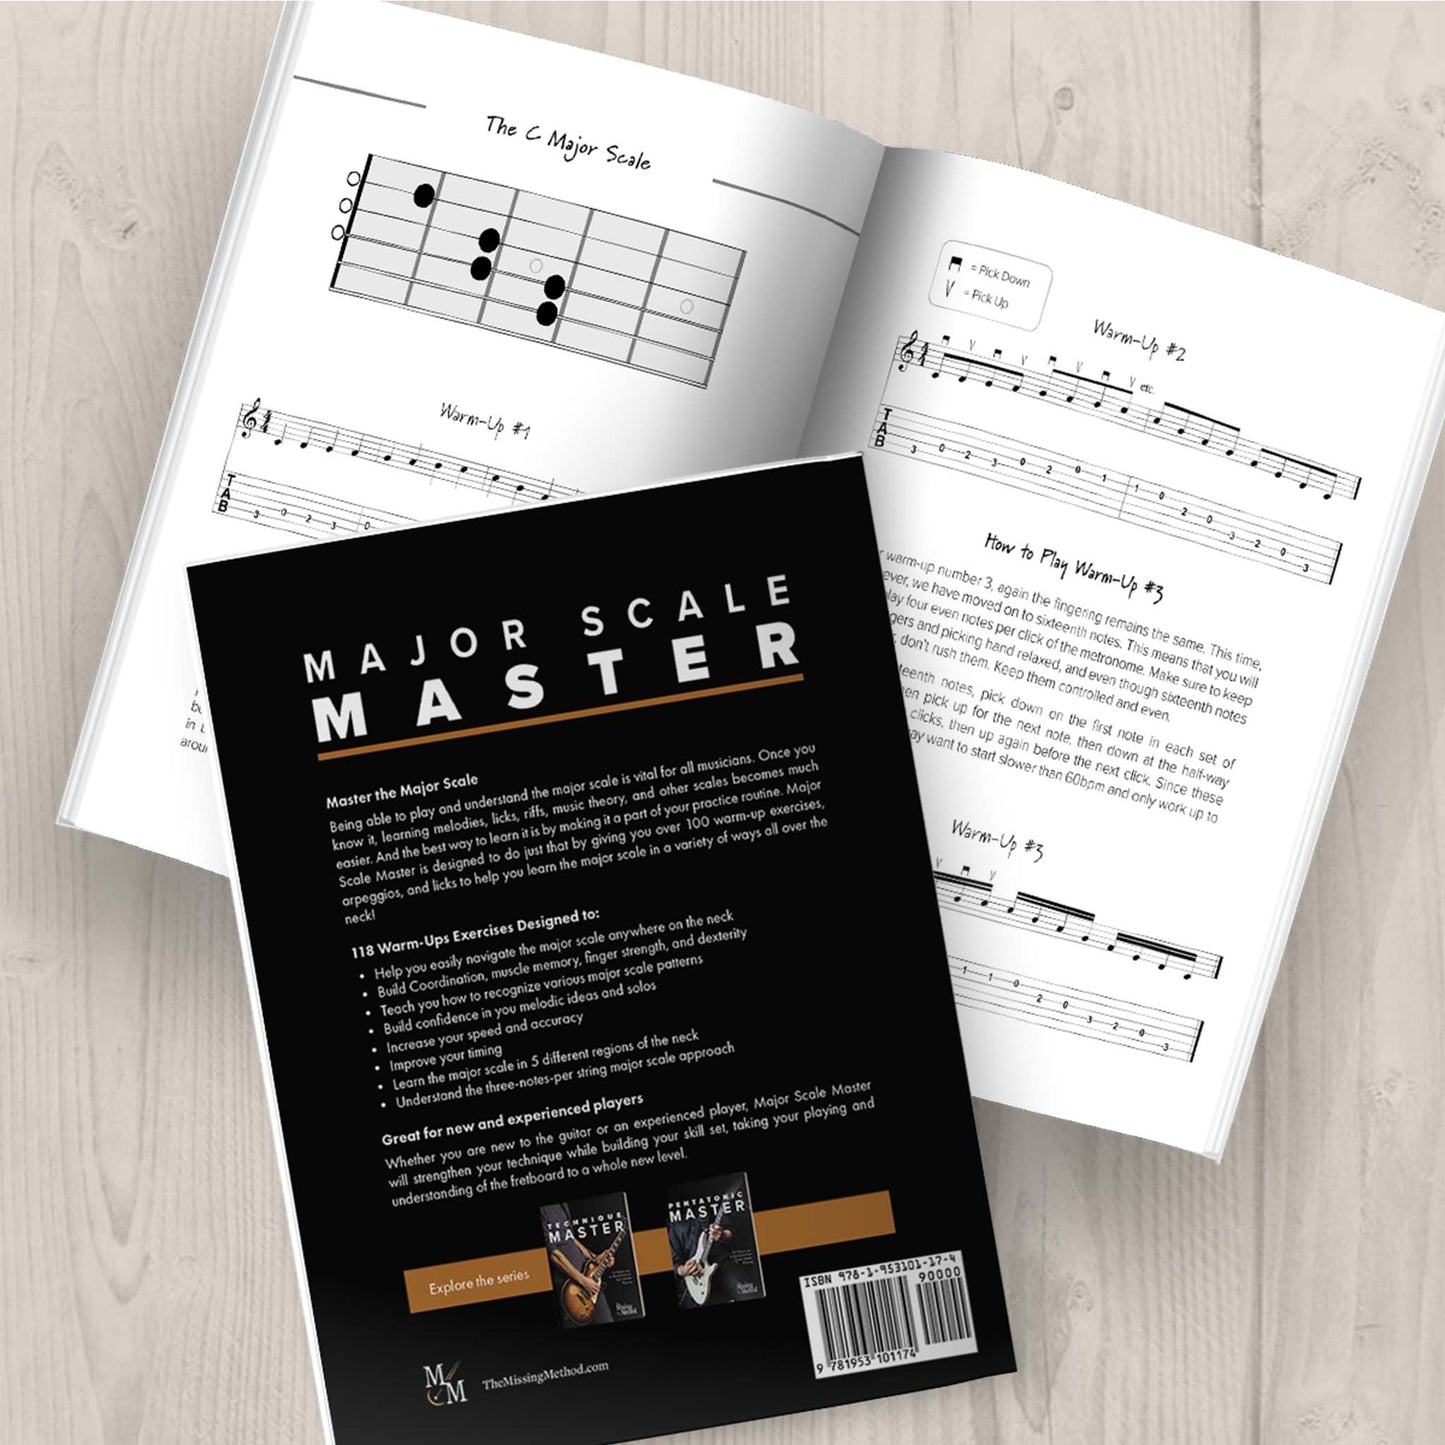 Major Scale Master from The Missing Method for Guitar. Image of two copies of the paperback book on a tabletop, one open displaying pages of the book, and the other closed, displaying the back cover.